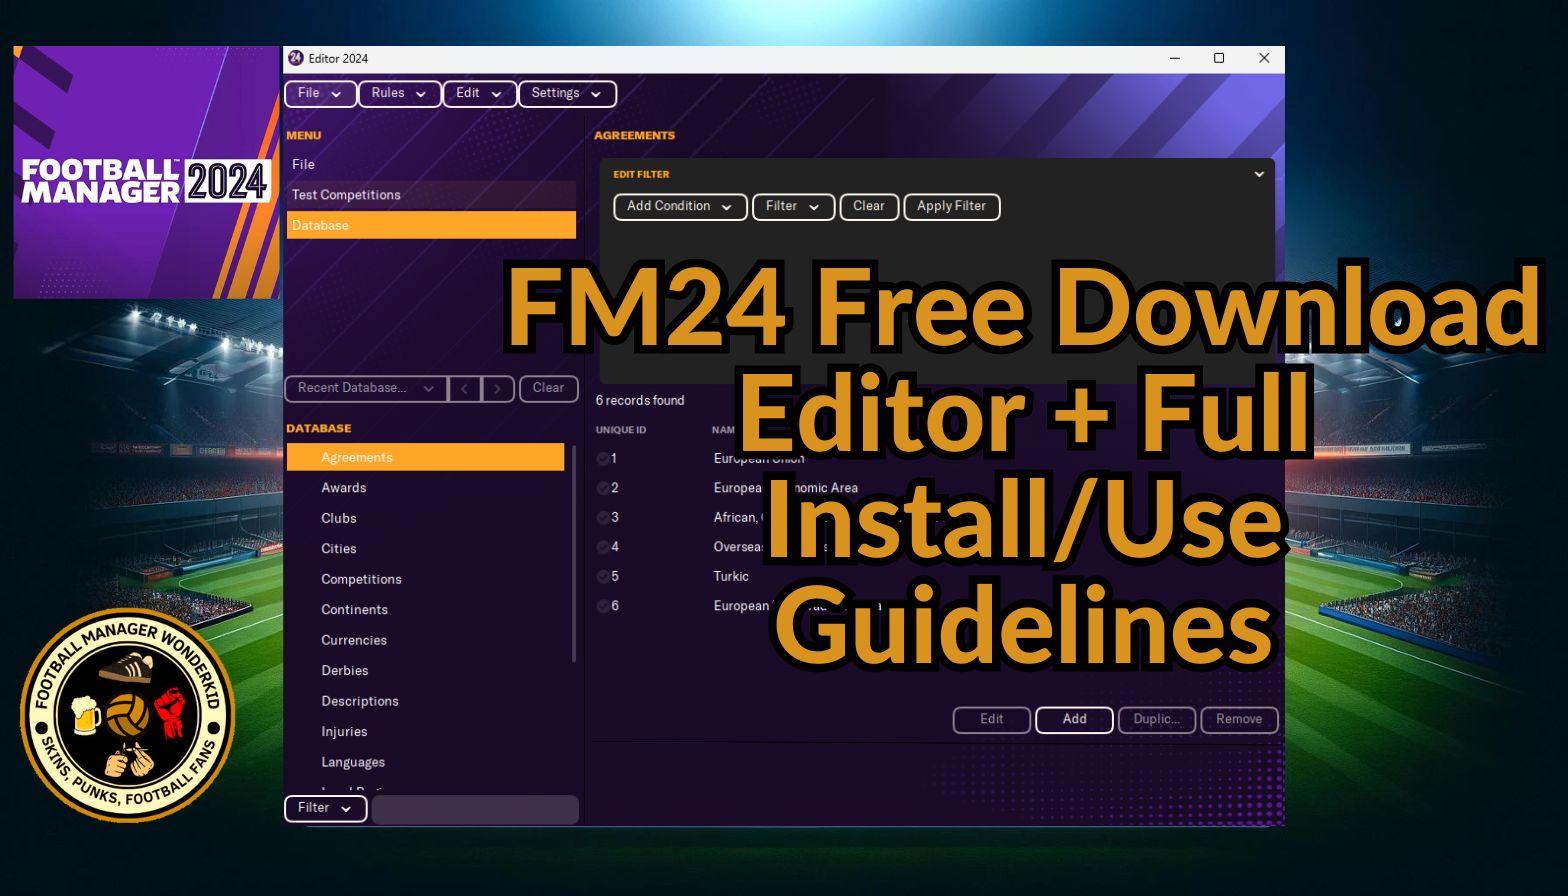 FM24 Editor Download + Guidness for Football Manager 2024 Magic